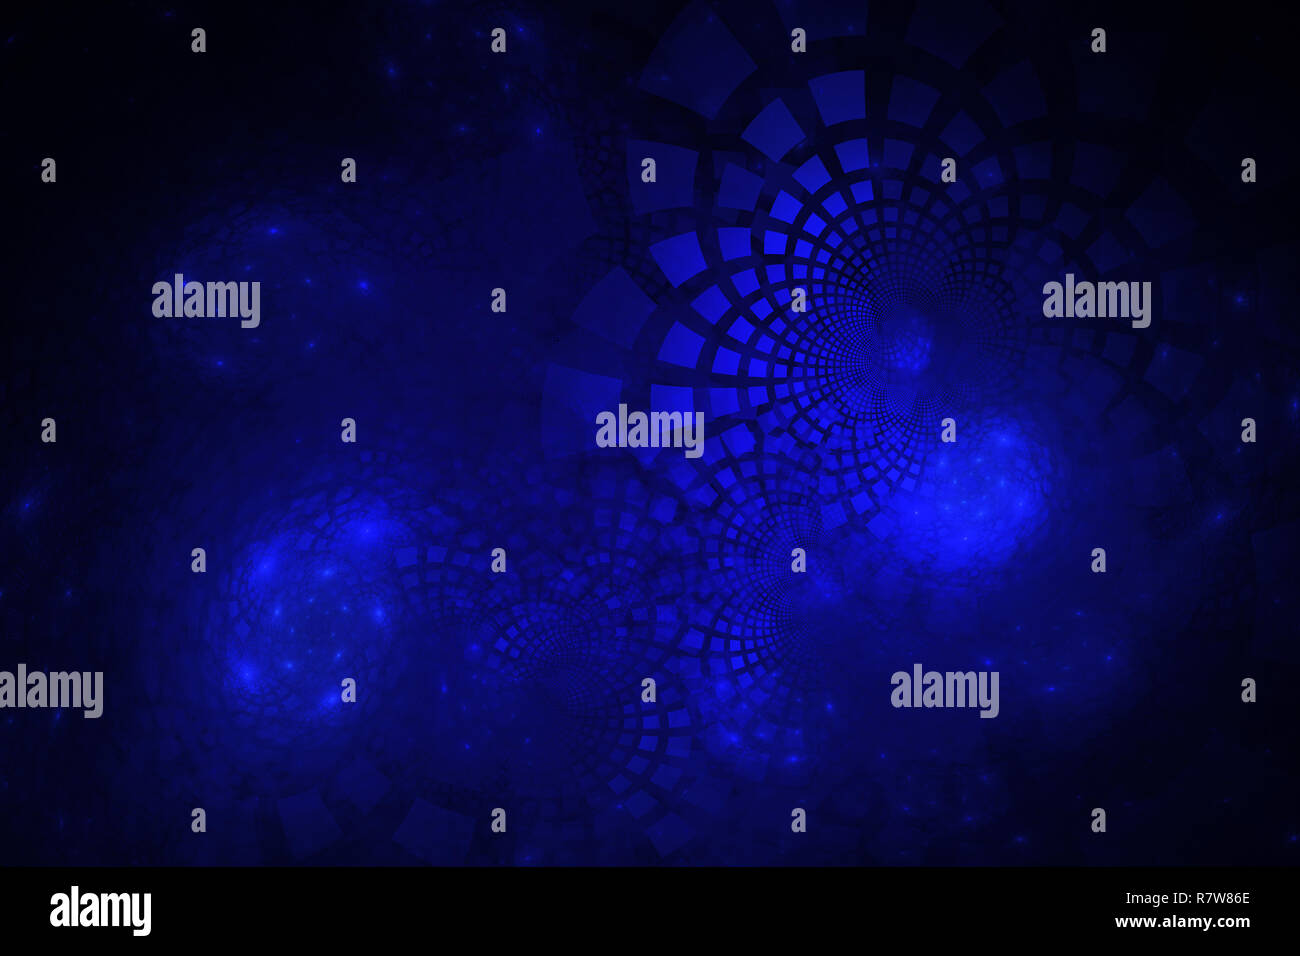 Fractal with electric blue tiles curving out in groups; on dark background Stock Photo